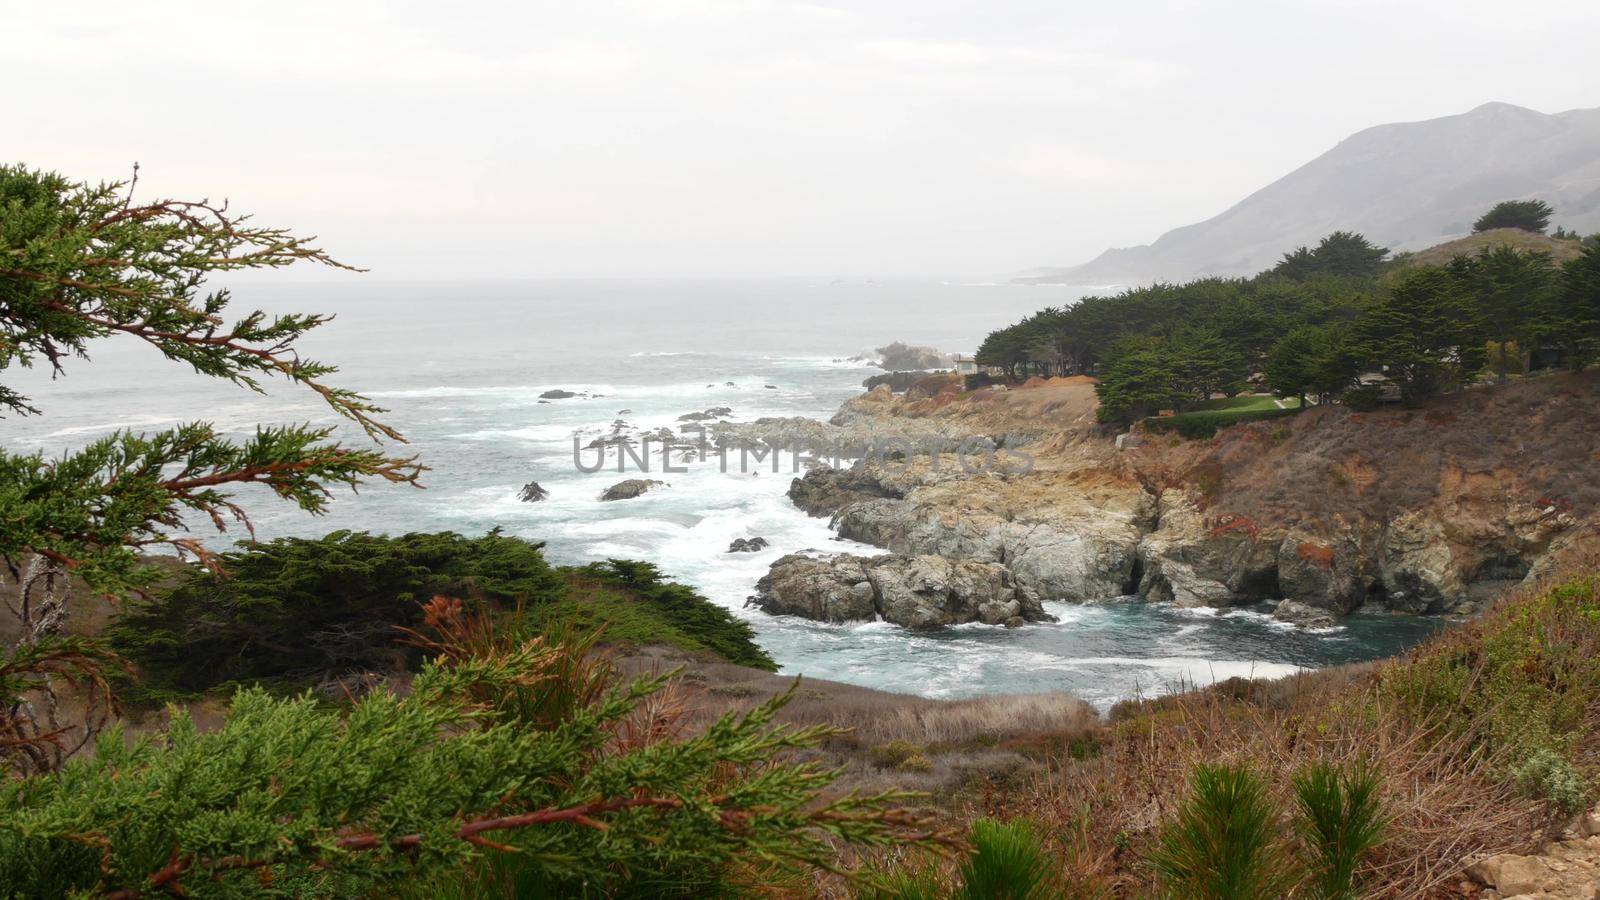 Rocky craggy ocean shore, foggy misty weather. Sea water waves crashing on beach. California scenic landscape, Big Sur nature, USA. Pacific coast highway seascape viewpoint from cliff or steep bluff.